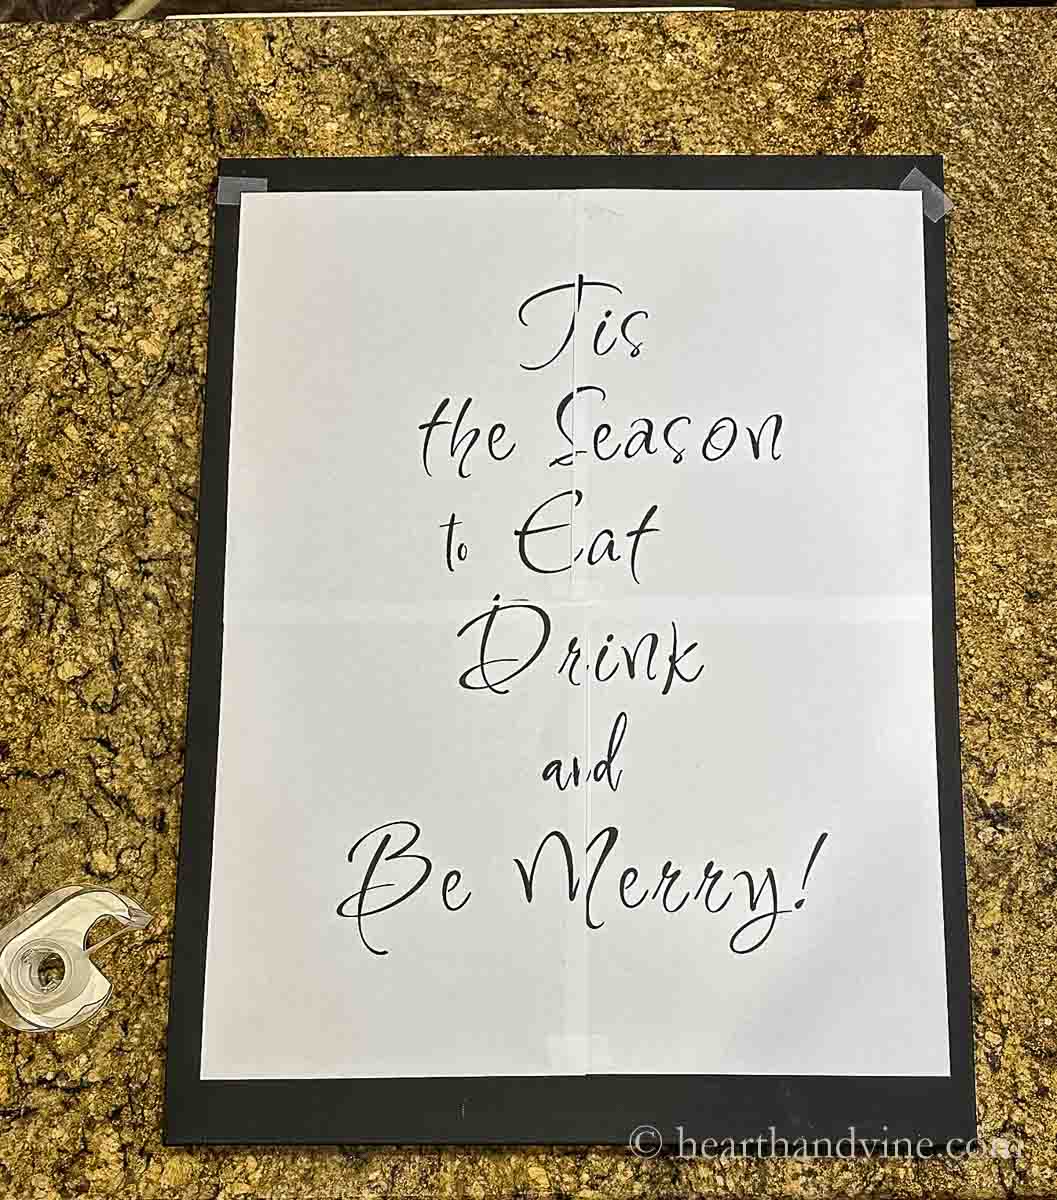 Four pages of computer paper printed out to create a large sign saying Tis the Season to Eat Drive and Be Merry, taped onto the black painted canvas.